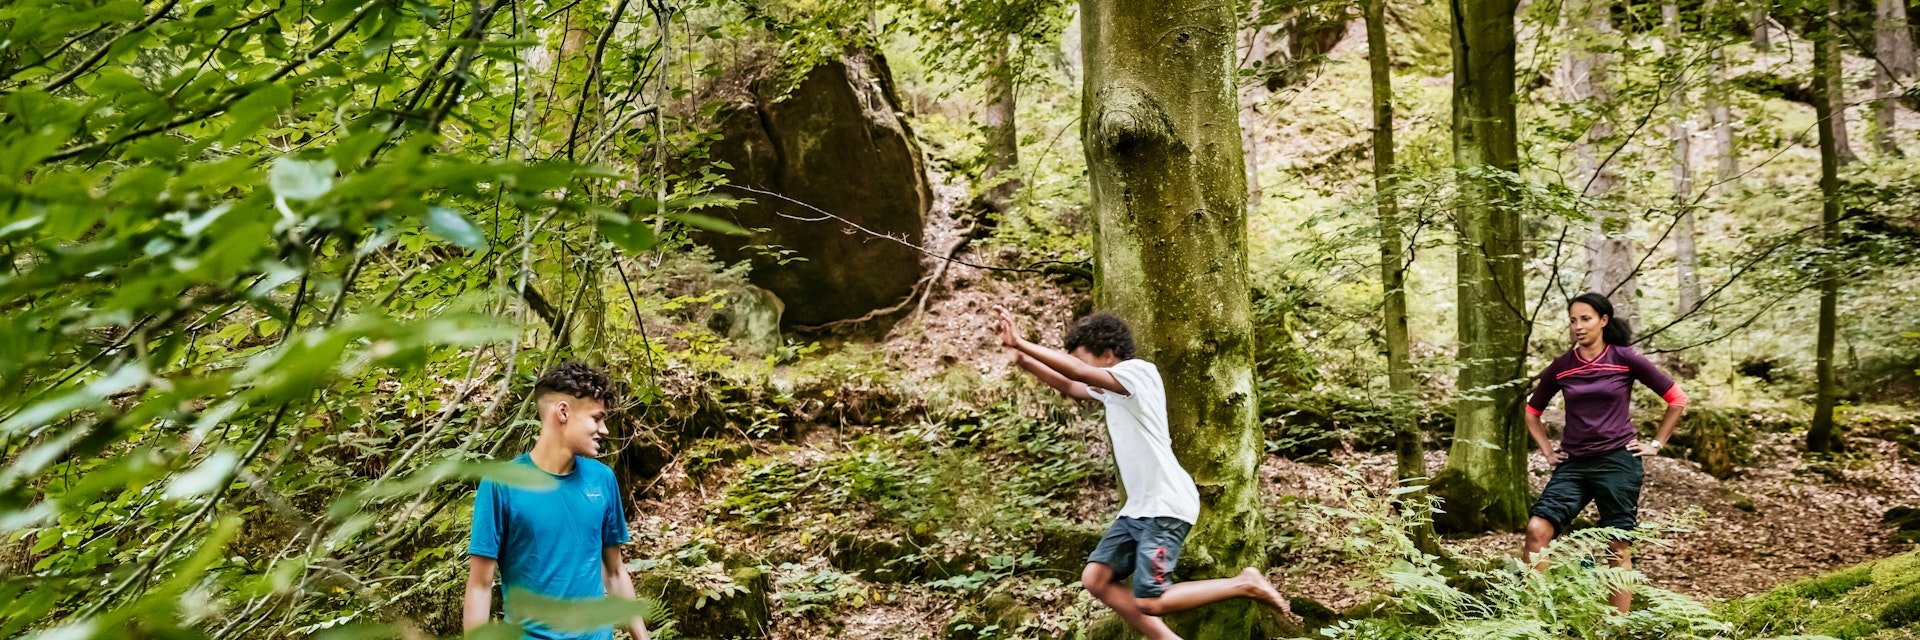 A young boy jumping off a rock into a river while out hiking a woodland trail with his family in the afternoon.